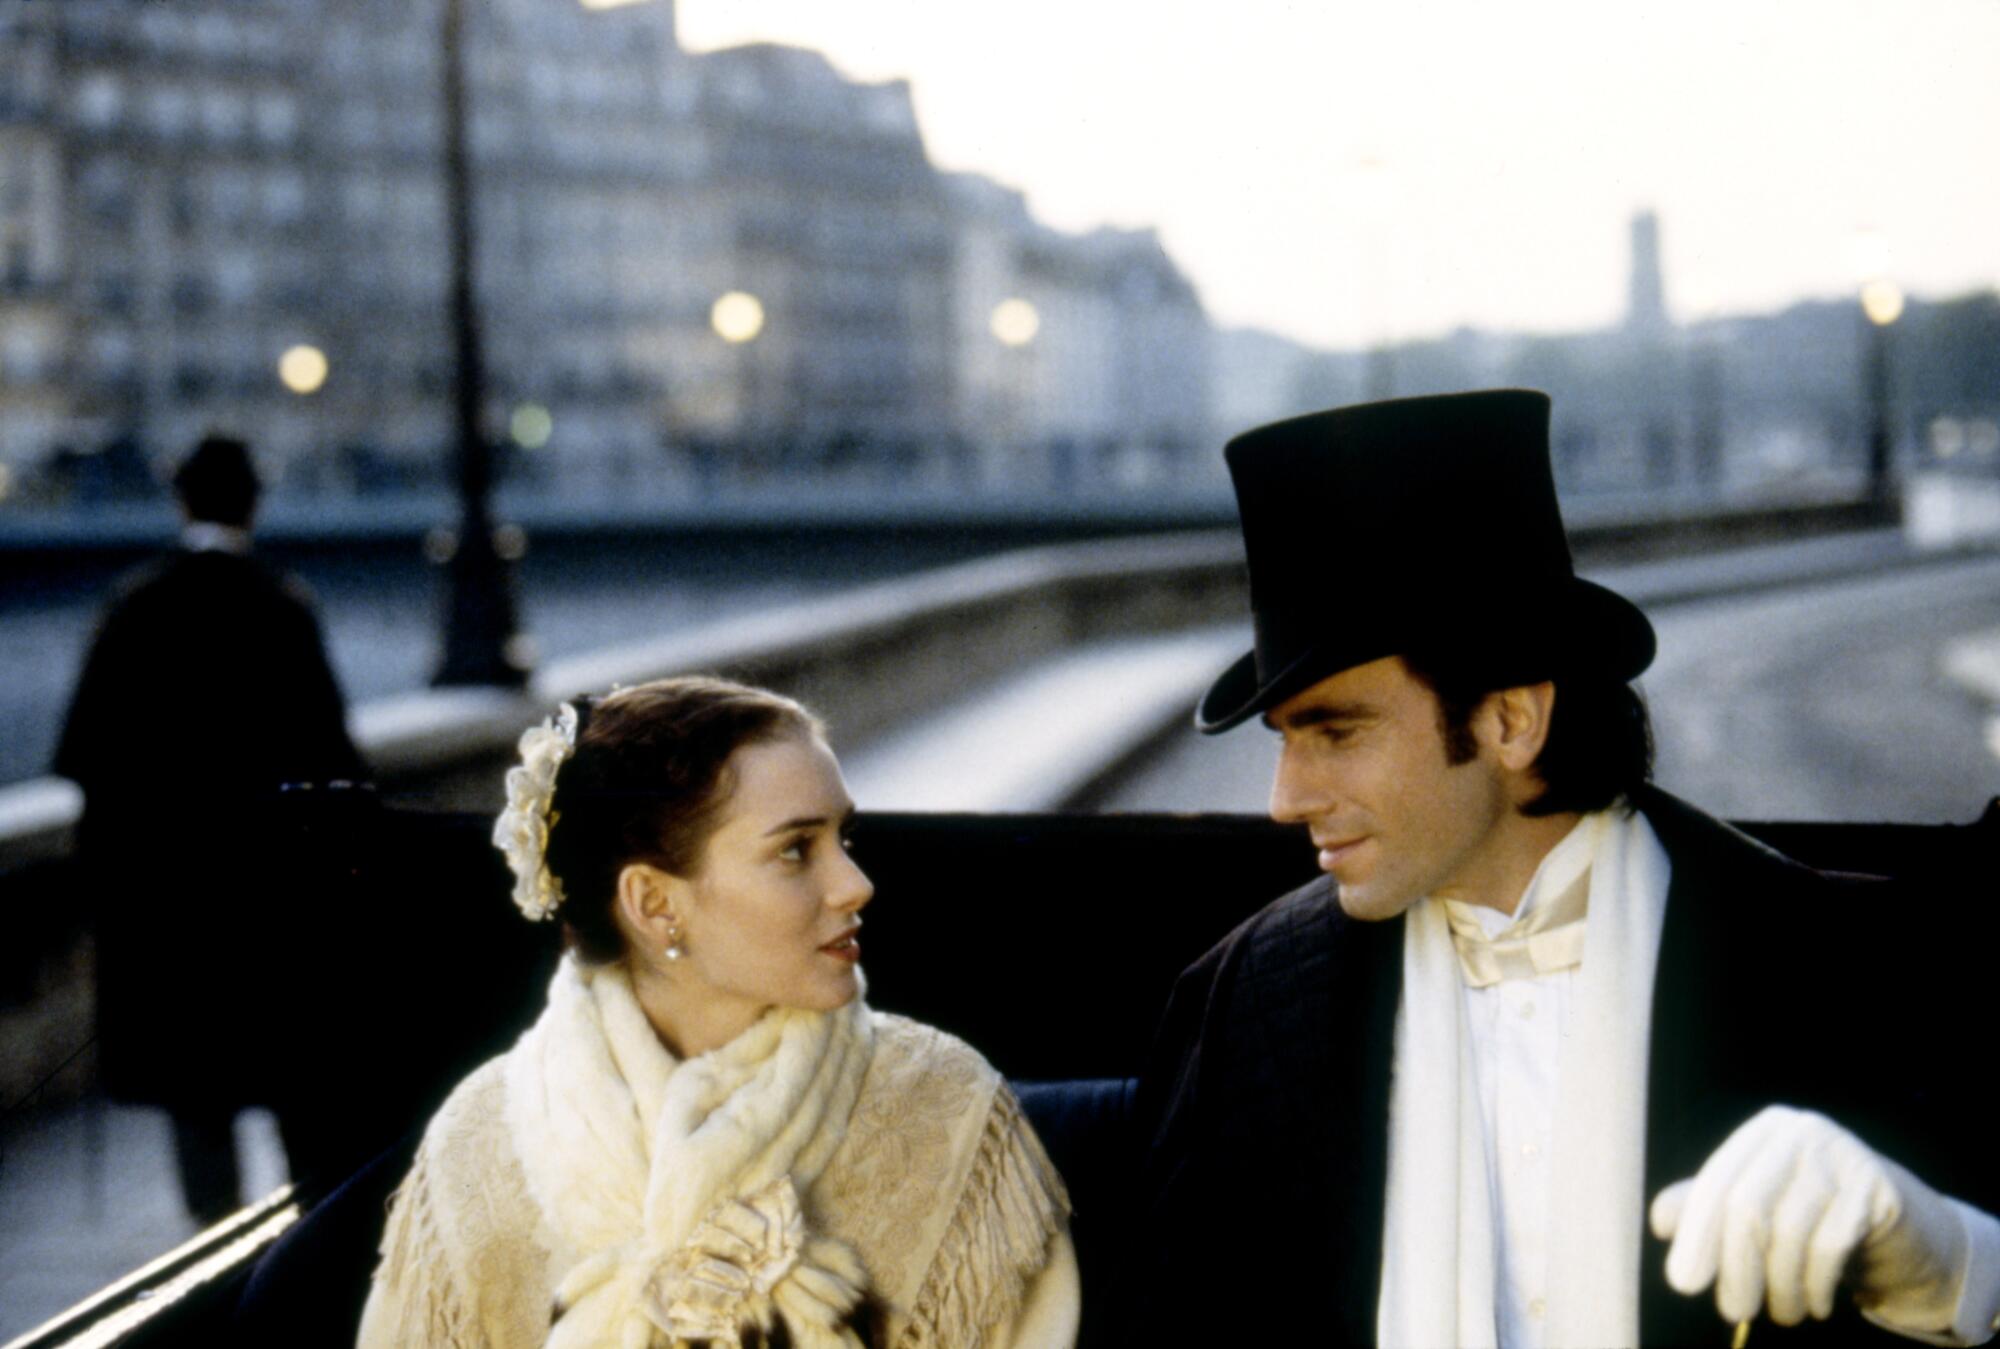 Winona Ryder and Daniel Day-Lewis, in period costume, sit in a carriage on the set of "The Age of Innocence."